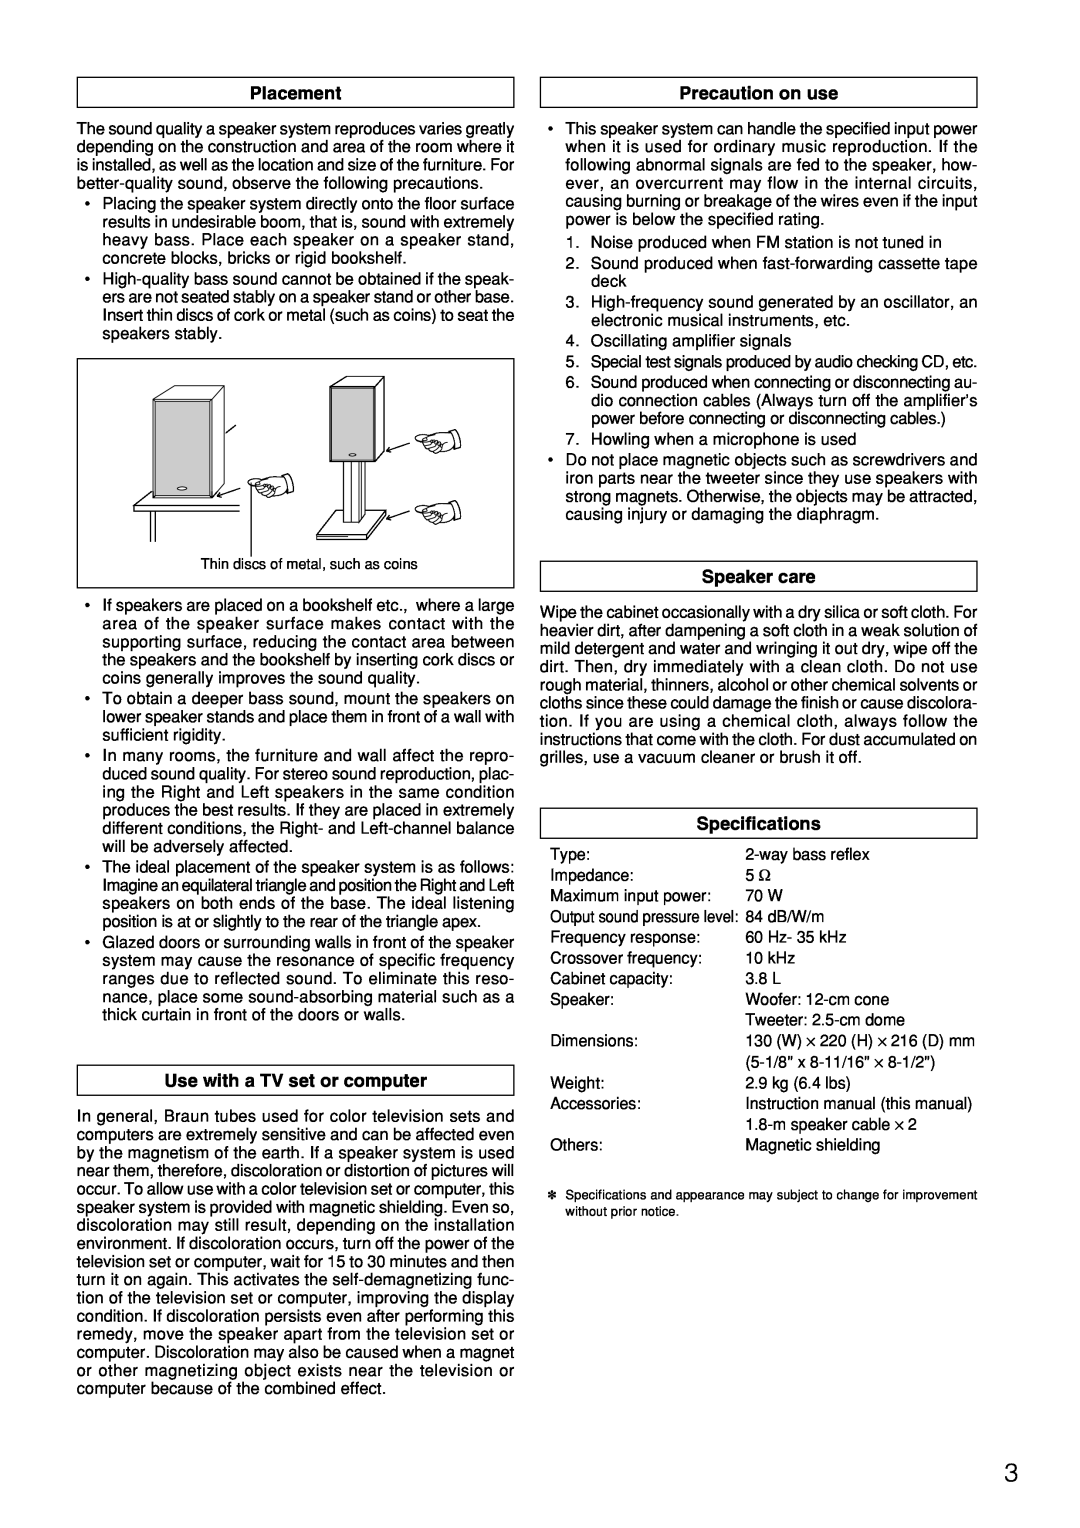 Onkyo D-N3X instruction manual Placement, Precaution on use, Use with a TV set or computer, Speaker care, Specifications 